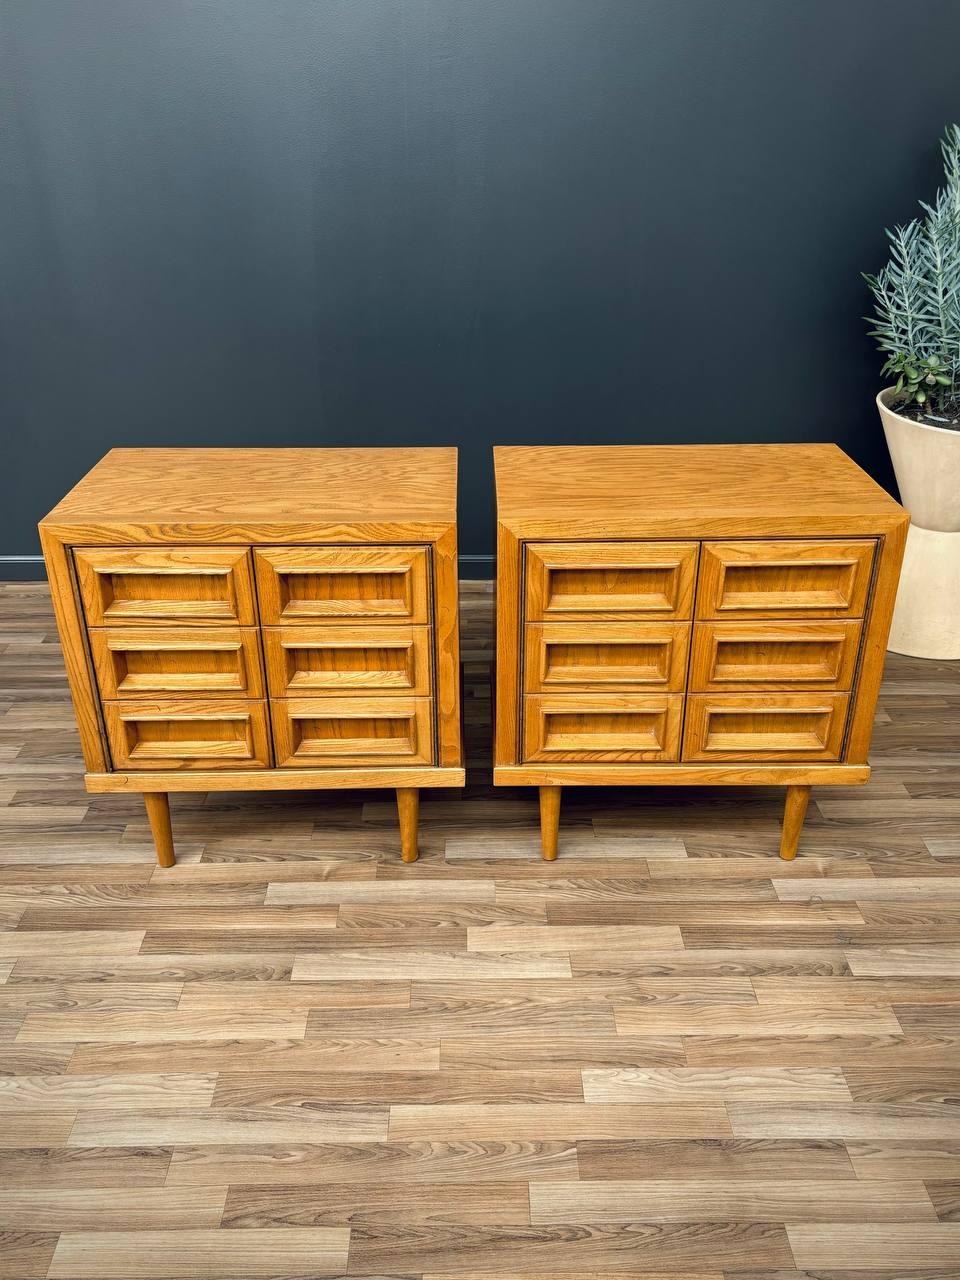 American Mid-Century Modern “Campatica” Brutalist Night Stands by Drexel For Sale